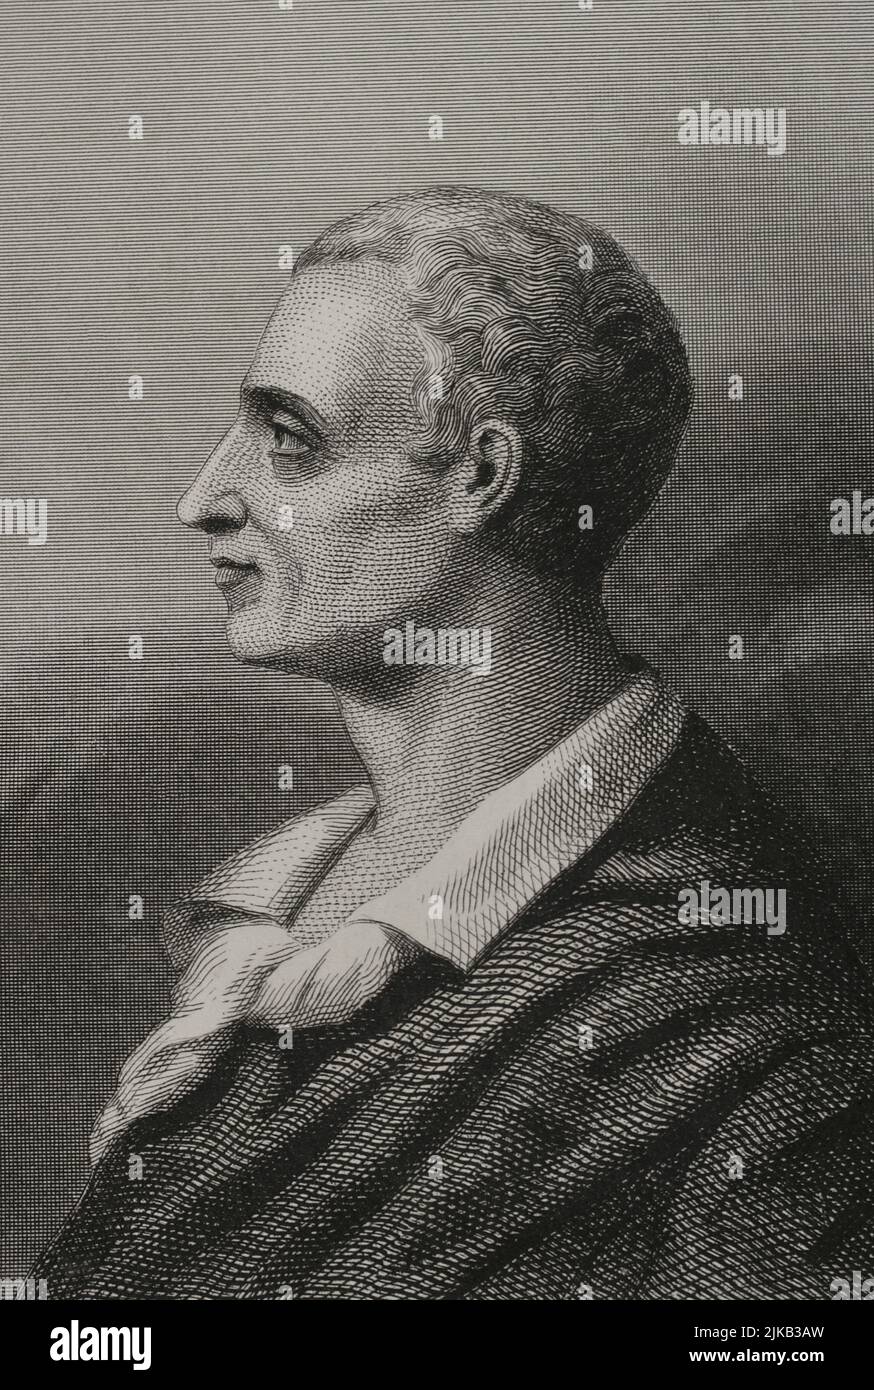 Montesquieu (1689-1755). French philosopher. Portrait. Engraving by Geoffroy. 'Historia Universal', by César Cantú. Volume VIII. 1858. Author: Charles Geoffroy (1819-1882). French engraver. Stock Photo